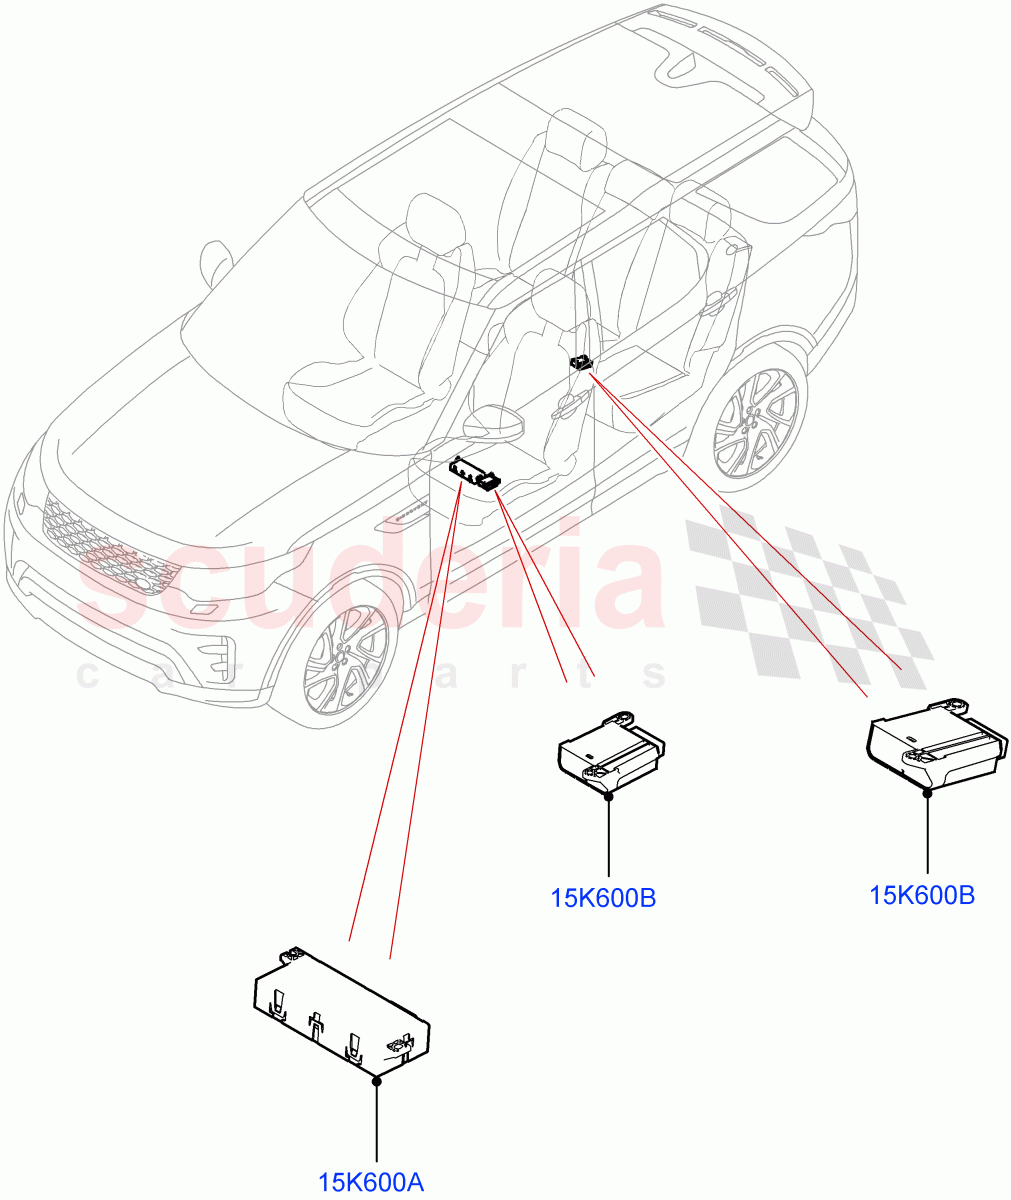 Vehicle Modules And Sensors(Seats, Solihull Plant Build)((V)FROMHA000001) of Land Rover Land Rover Discovery 5 (2017+) [2.0 Turbo Diesel]